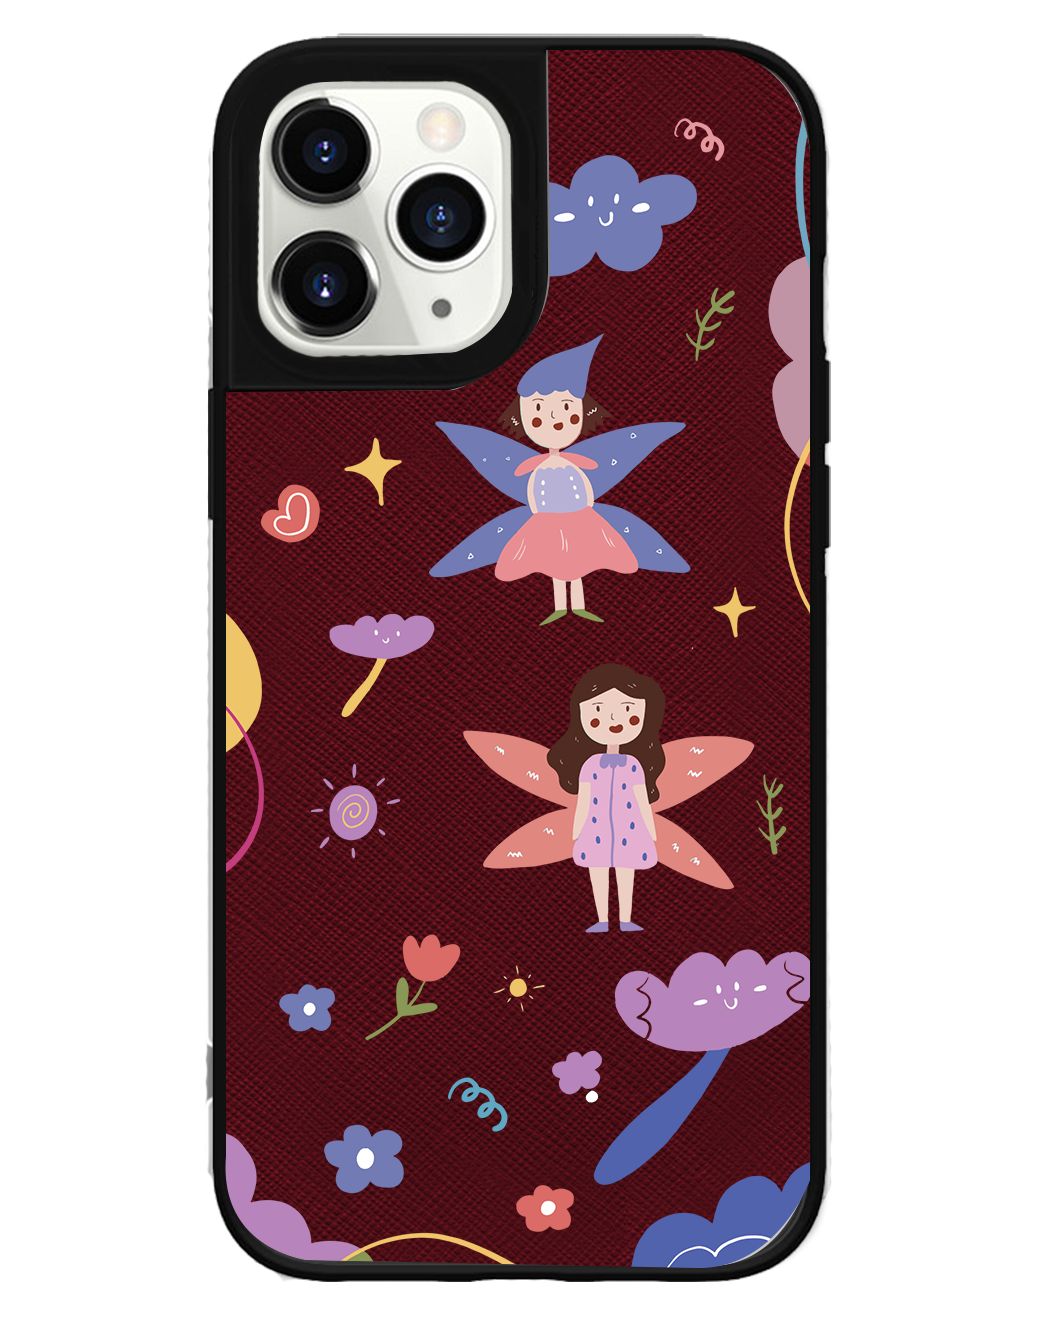 iPhone Leather Grip Case - Fairy Pattern